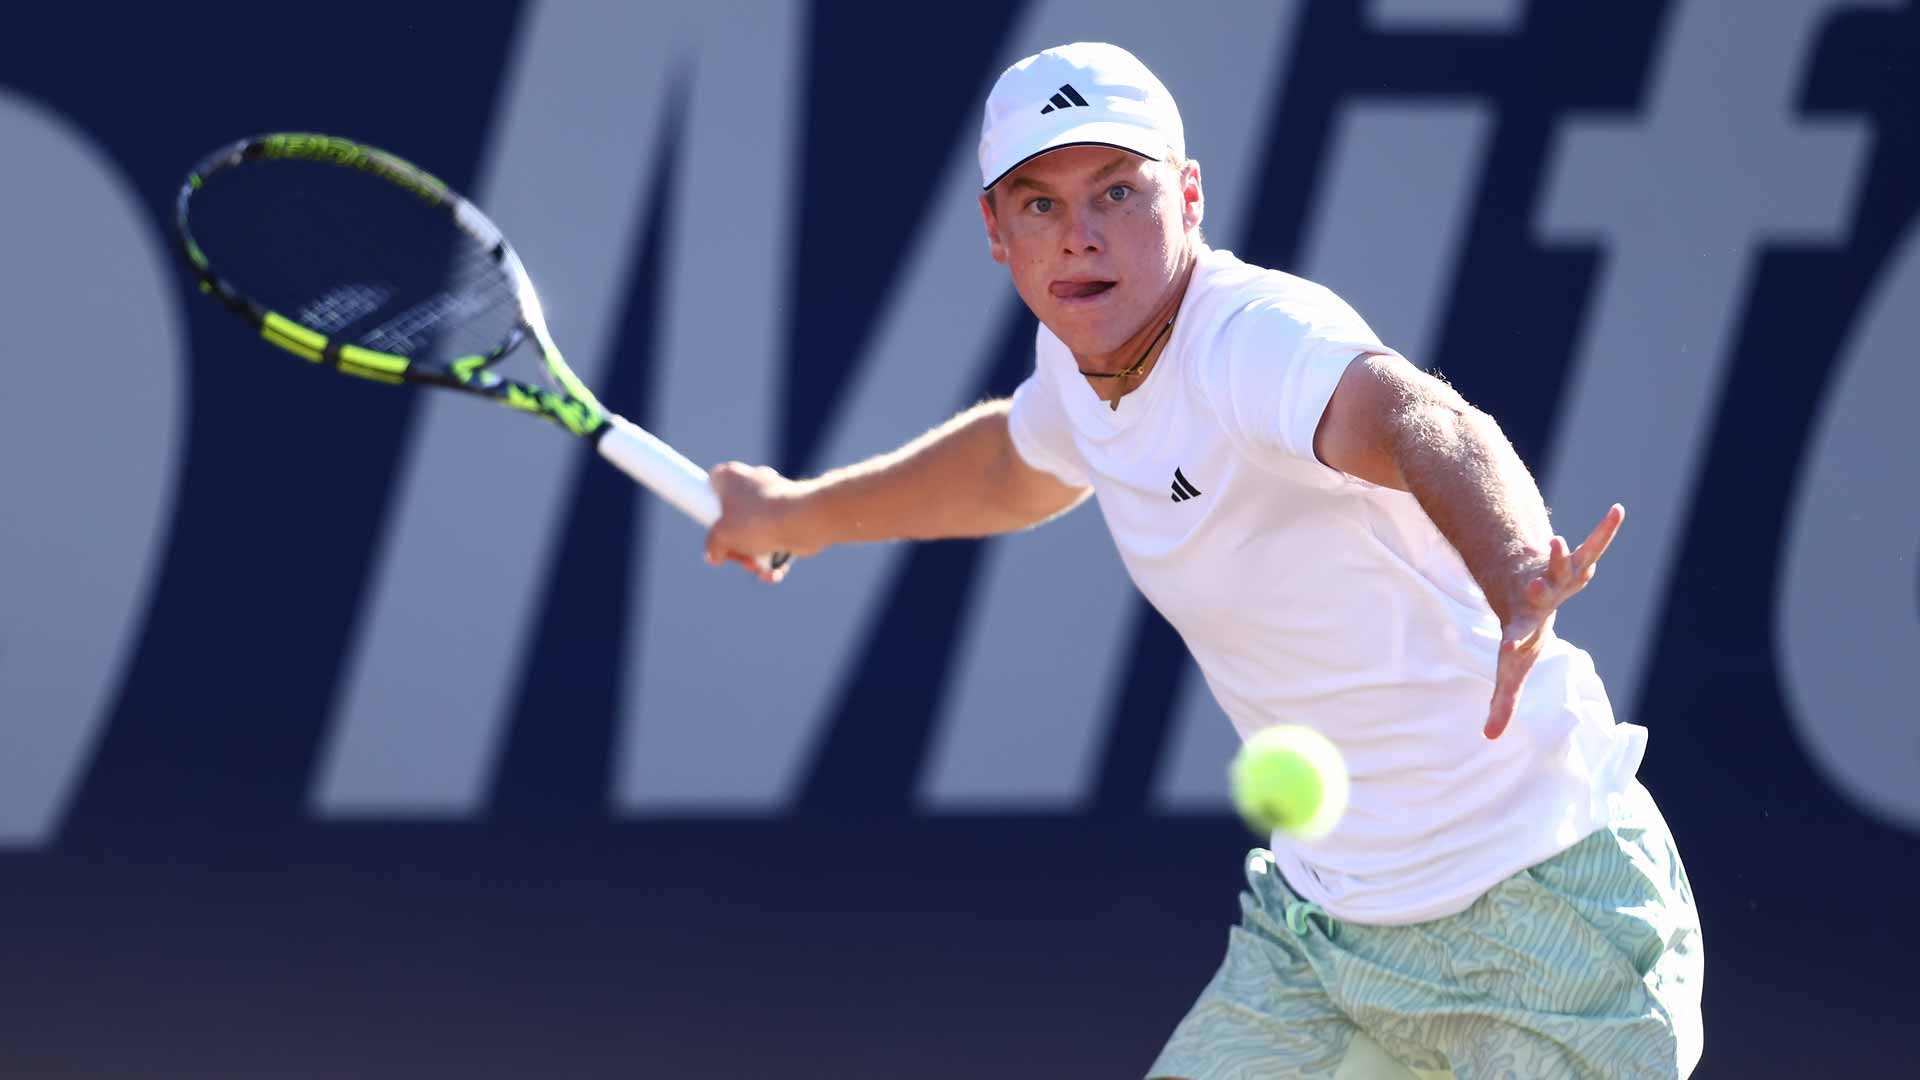 Alex Michelsen defeats Constant Lestienne in straight sets Monday in Los Cabos.